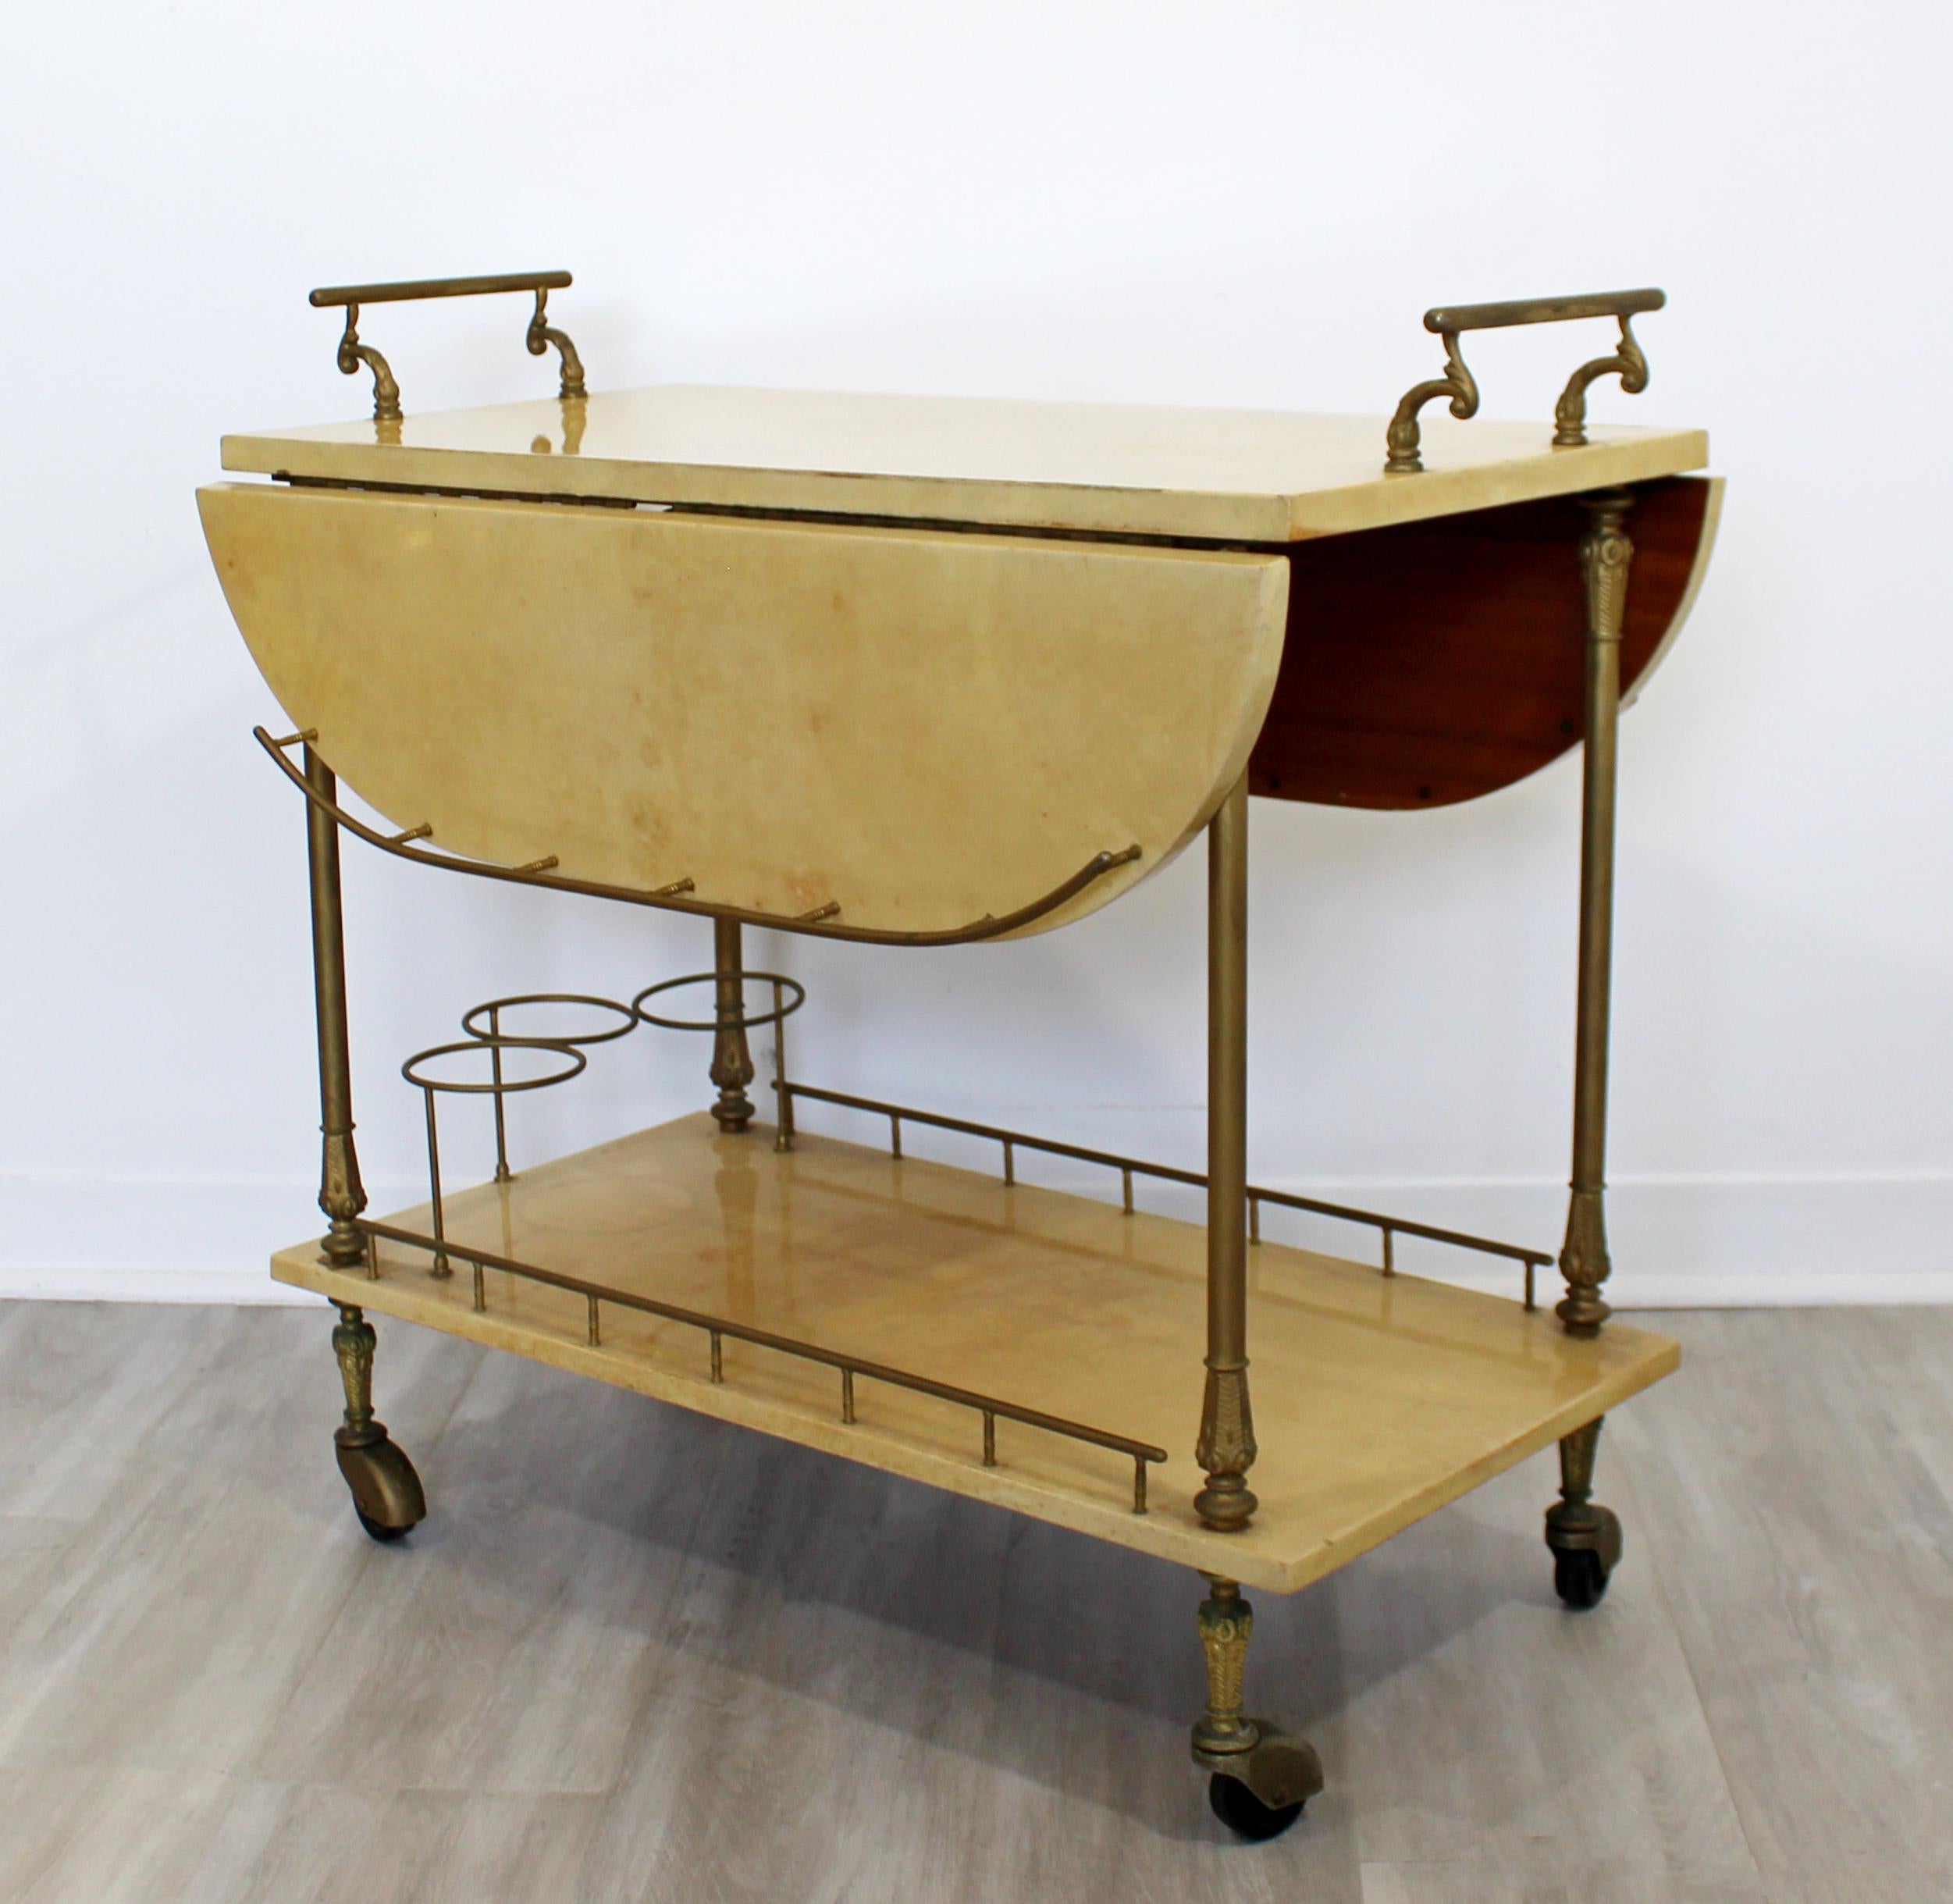 For your consideration is a magnificent, two-tier rolling bar or service cart, made of lacquered goatskin and brass, by Aldo Tura, made in Italy, circa 1960s. In excellent vintage condition. The dimensions are 31.5